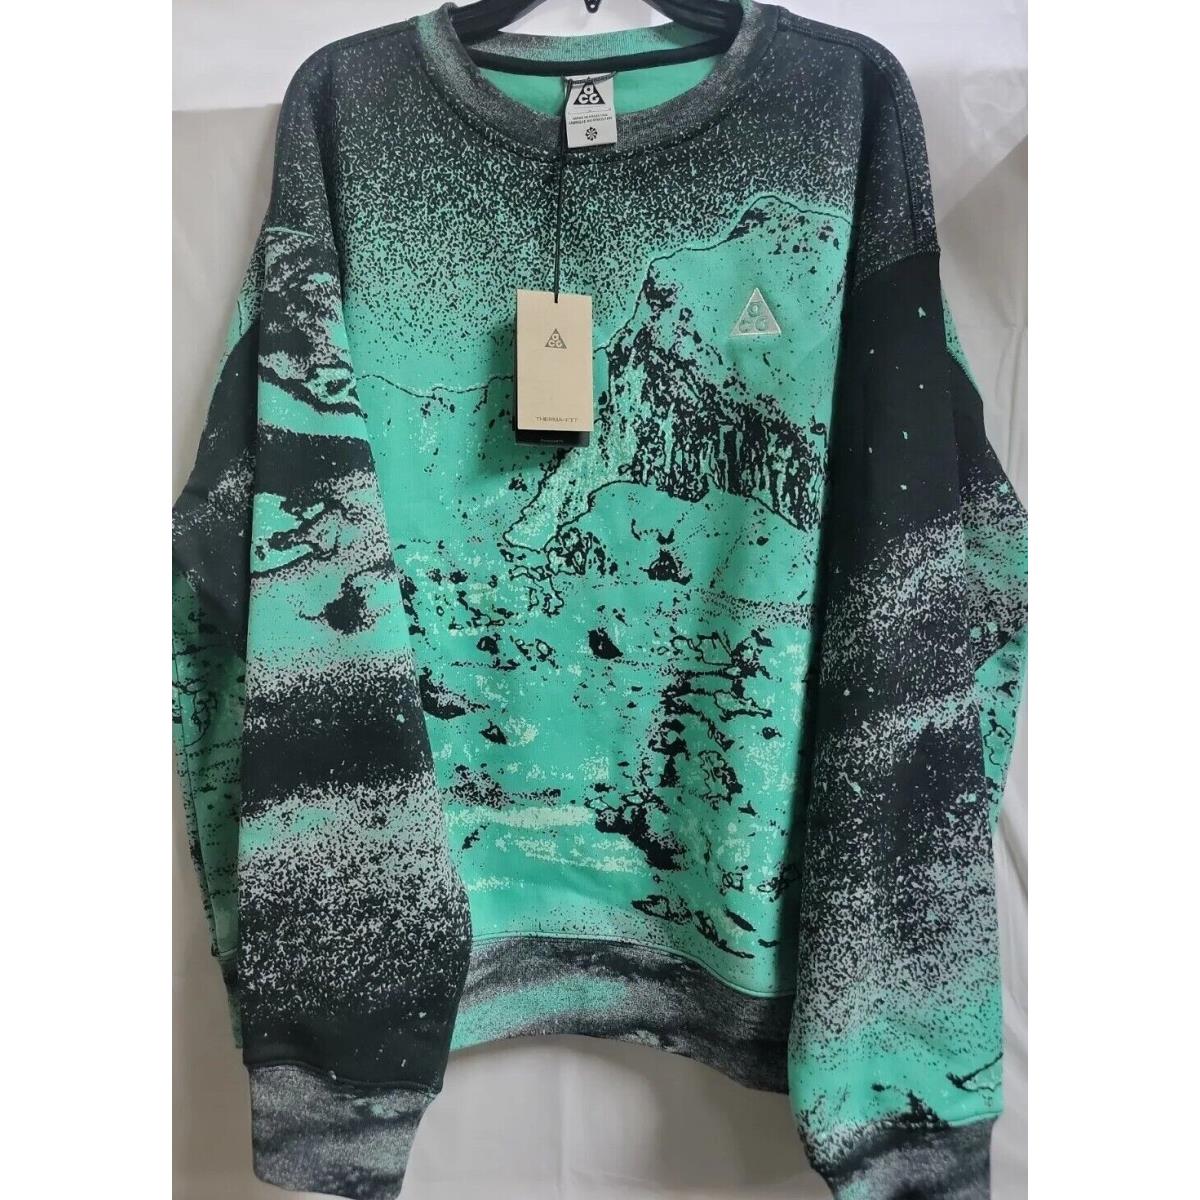 Nike Acg Therma-fit All Over Print Fleece Crew Neck Size Small DQ5791-369